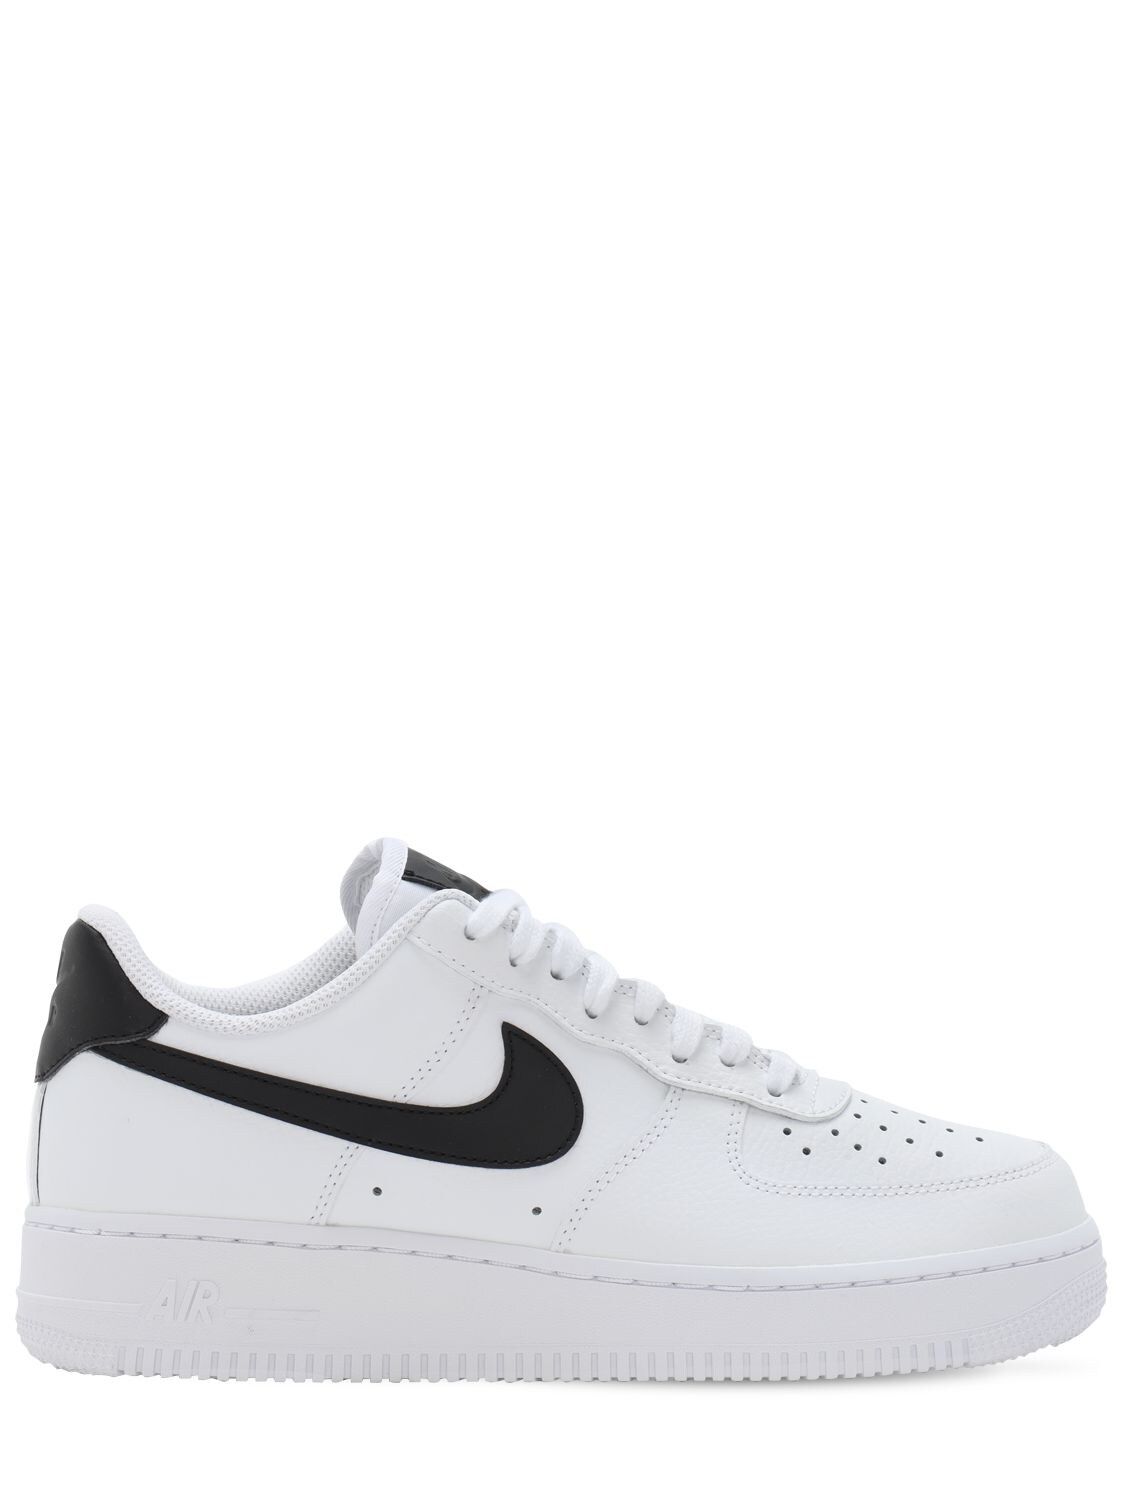 NIKE AIR FORCE 1 '07 ESS trainers,72IDL1088-MTUY0